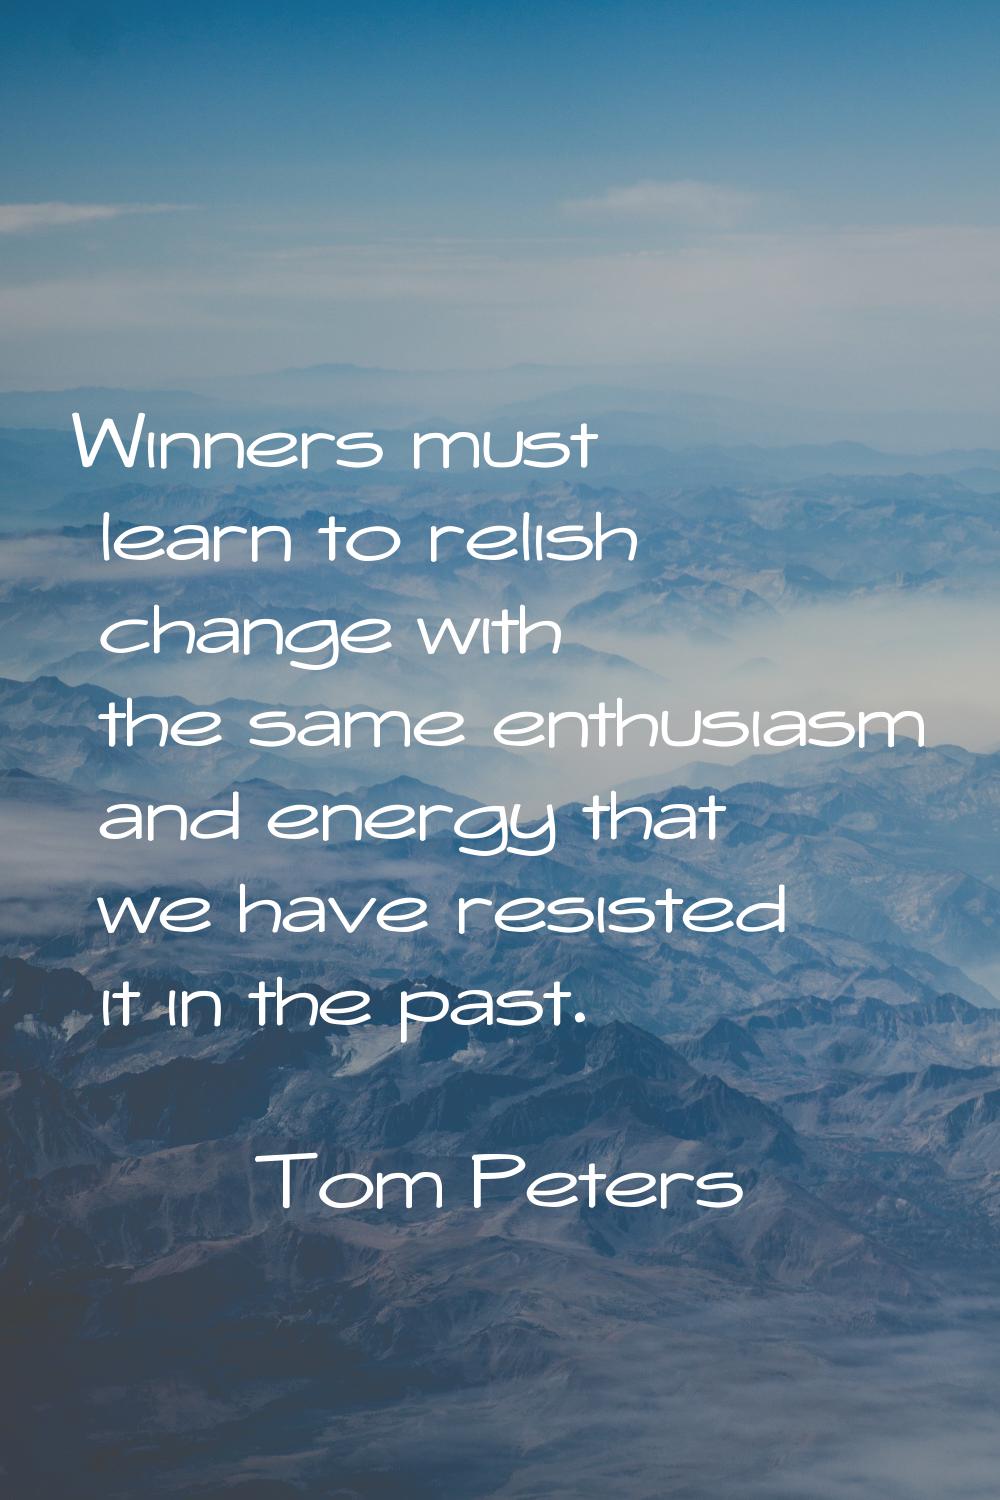 Winners must learn to relish change with the same enthusiasm and energy that we have resisted it in